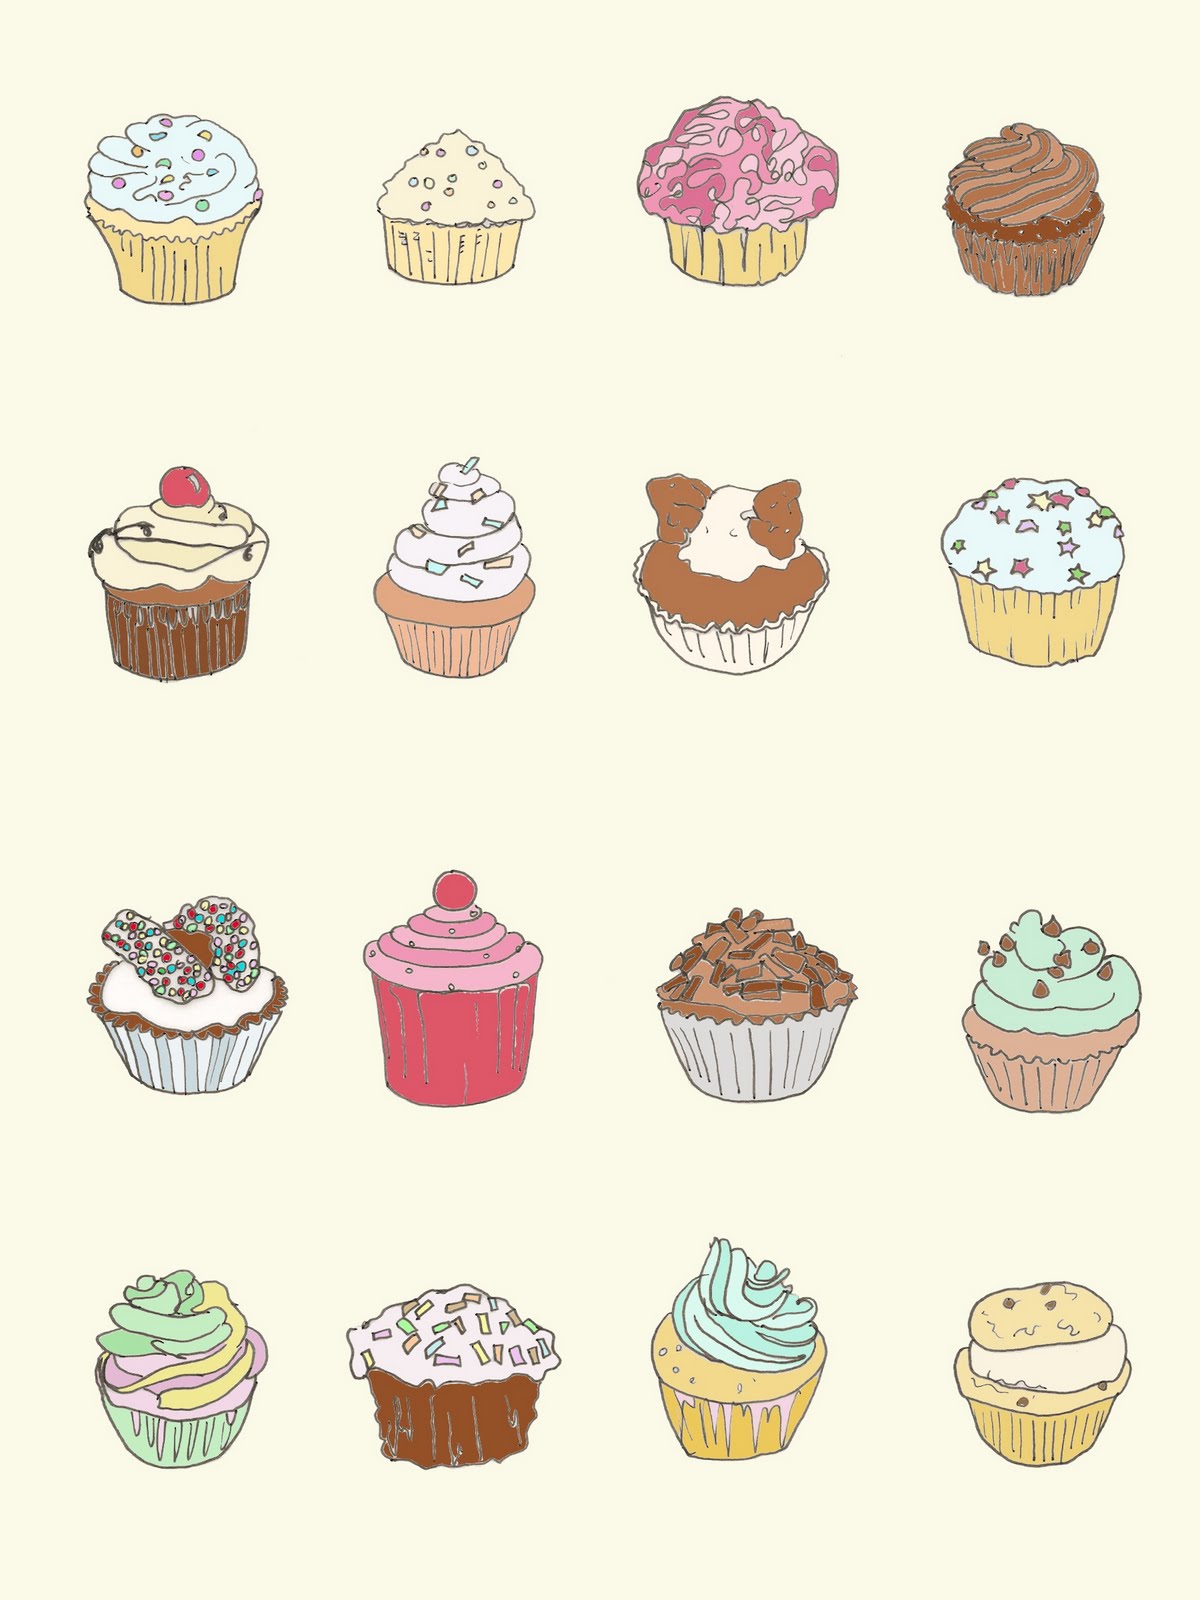 How Are You This Video Shows To Draw A Cupcake Backgrounds | JPG Free  Download - Pikbest